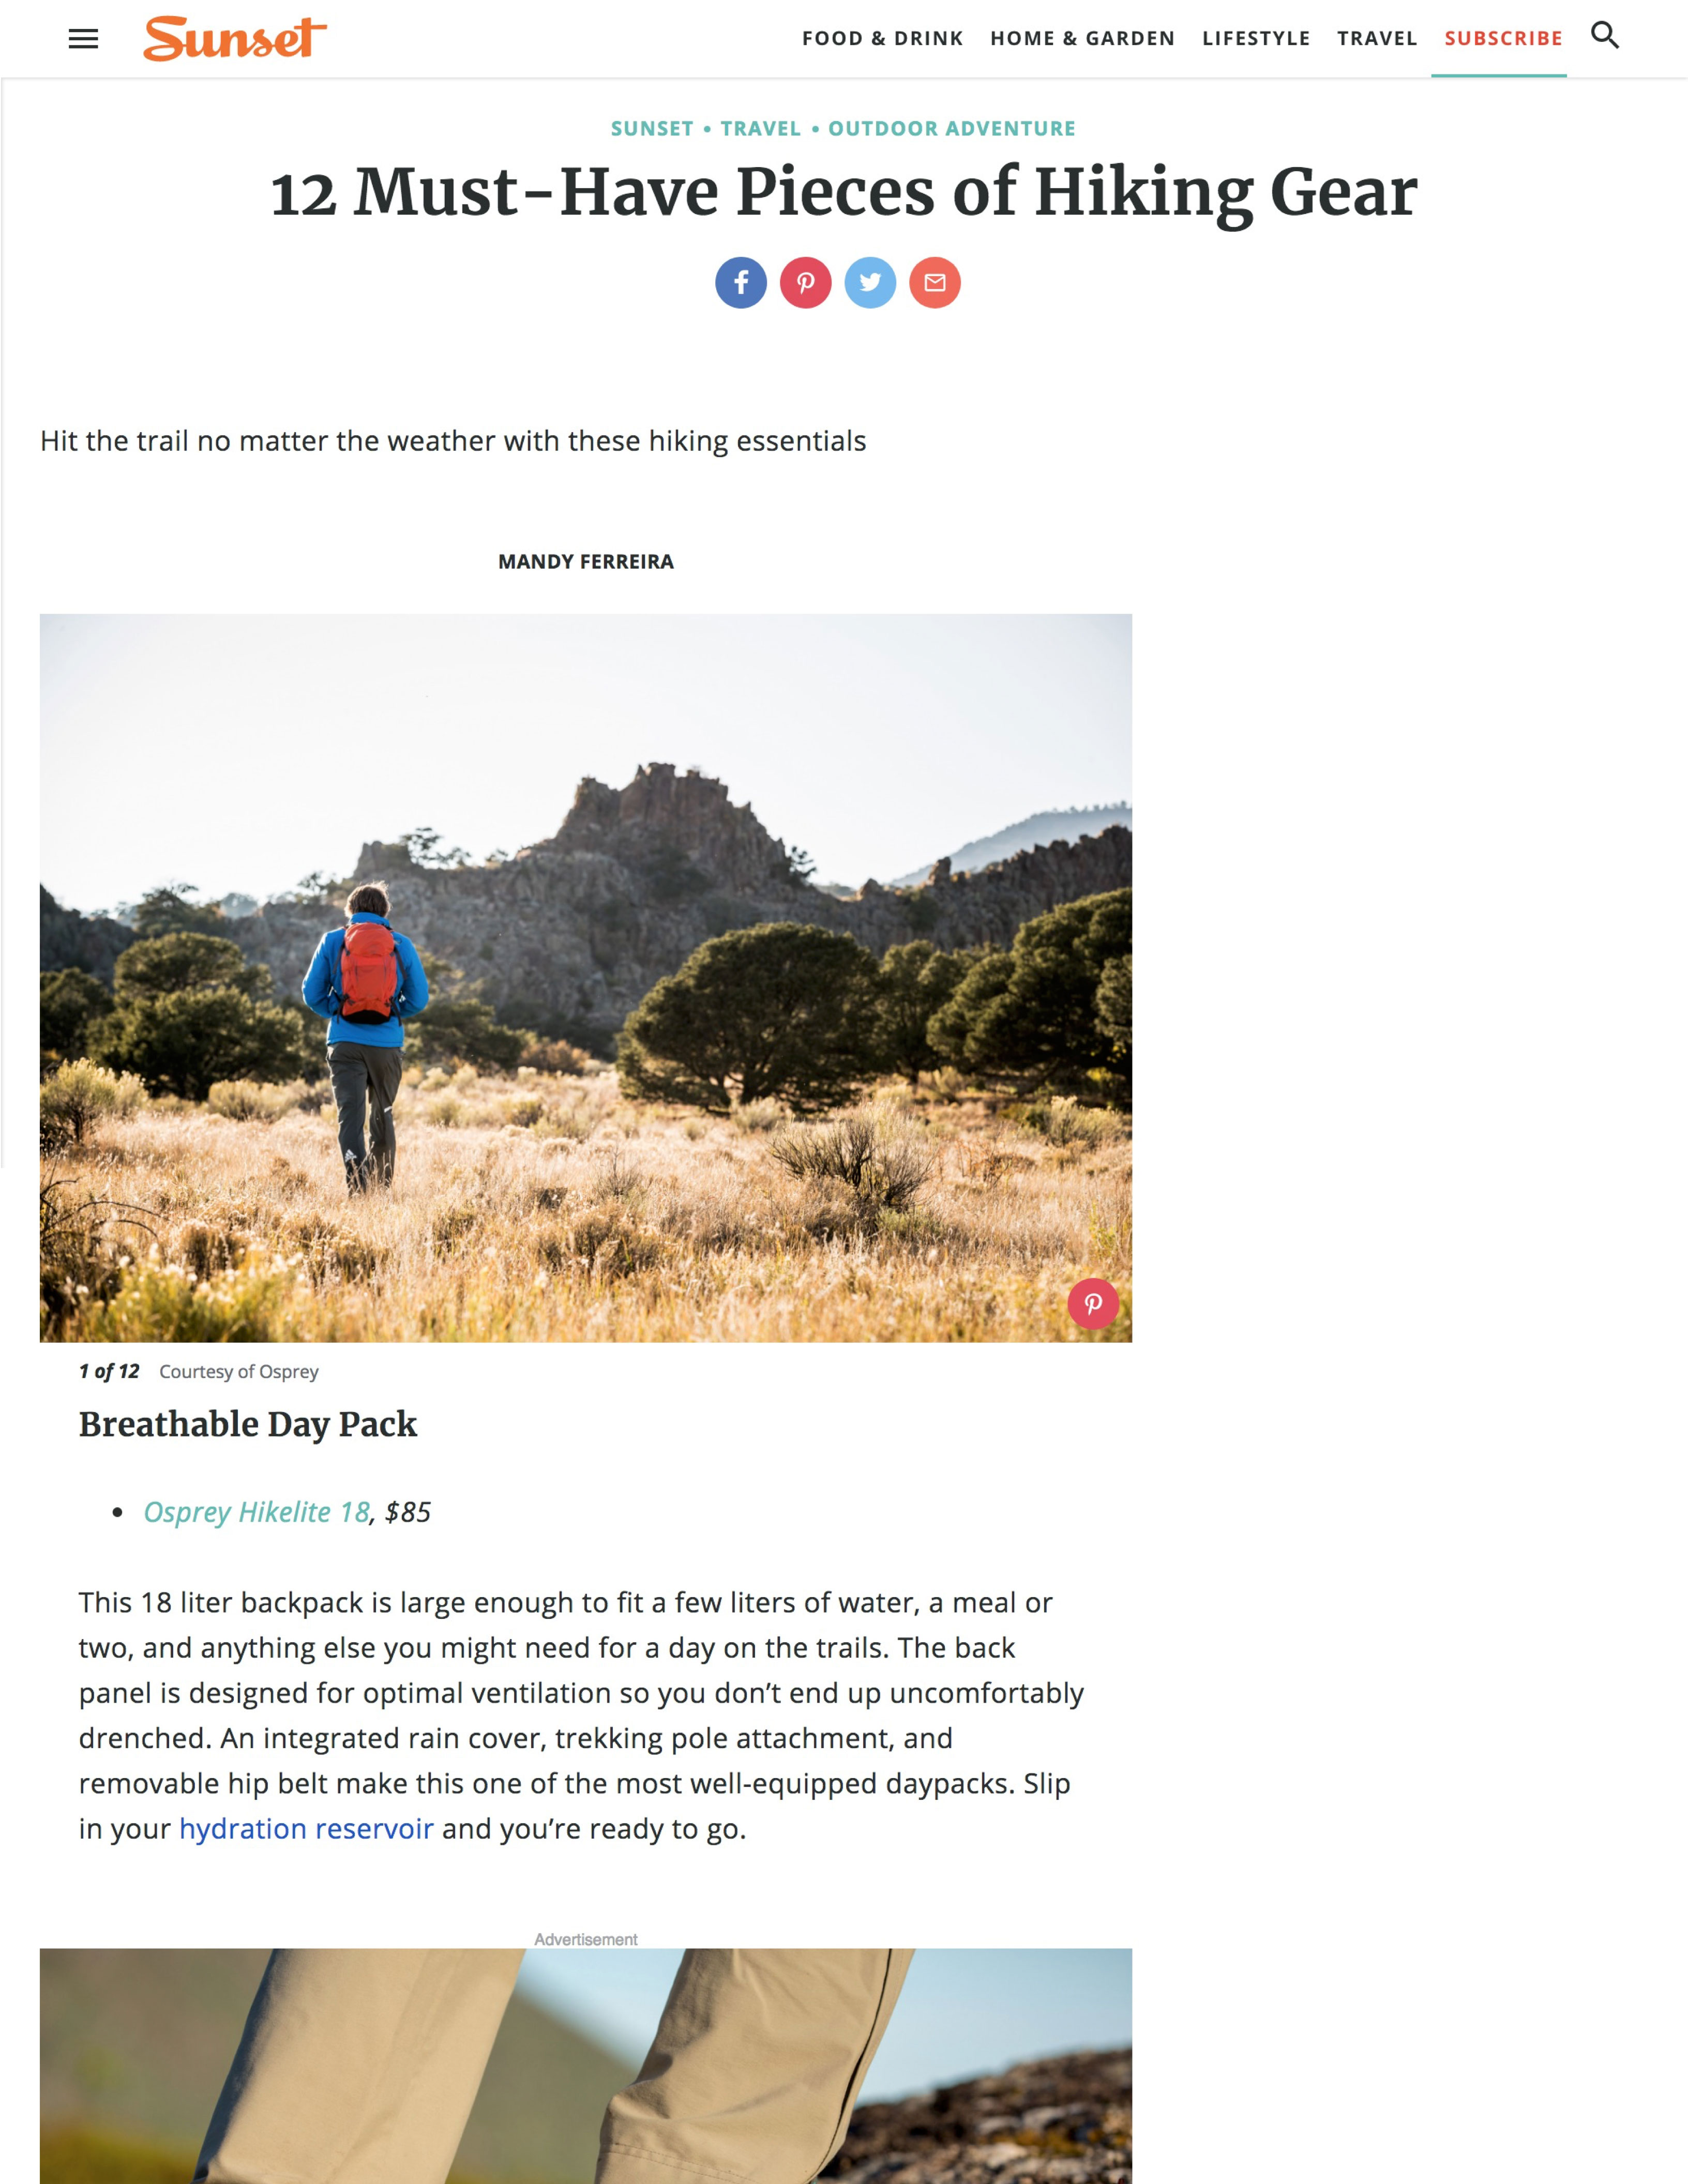 12 Must-Have Pieces of Hiking Gear by Mandy Ferreira Sunset Magazine